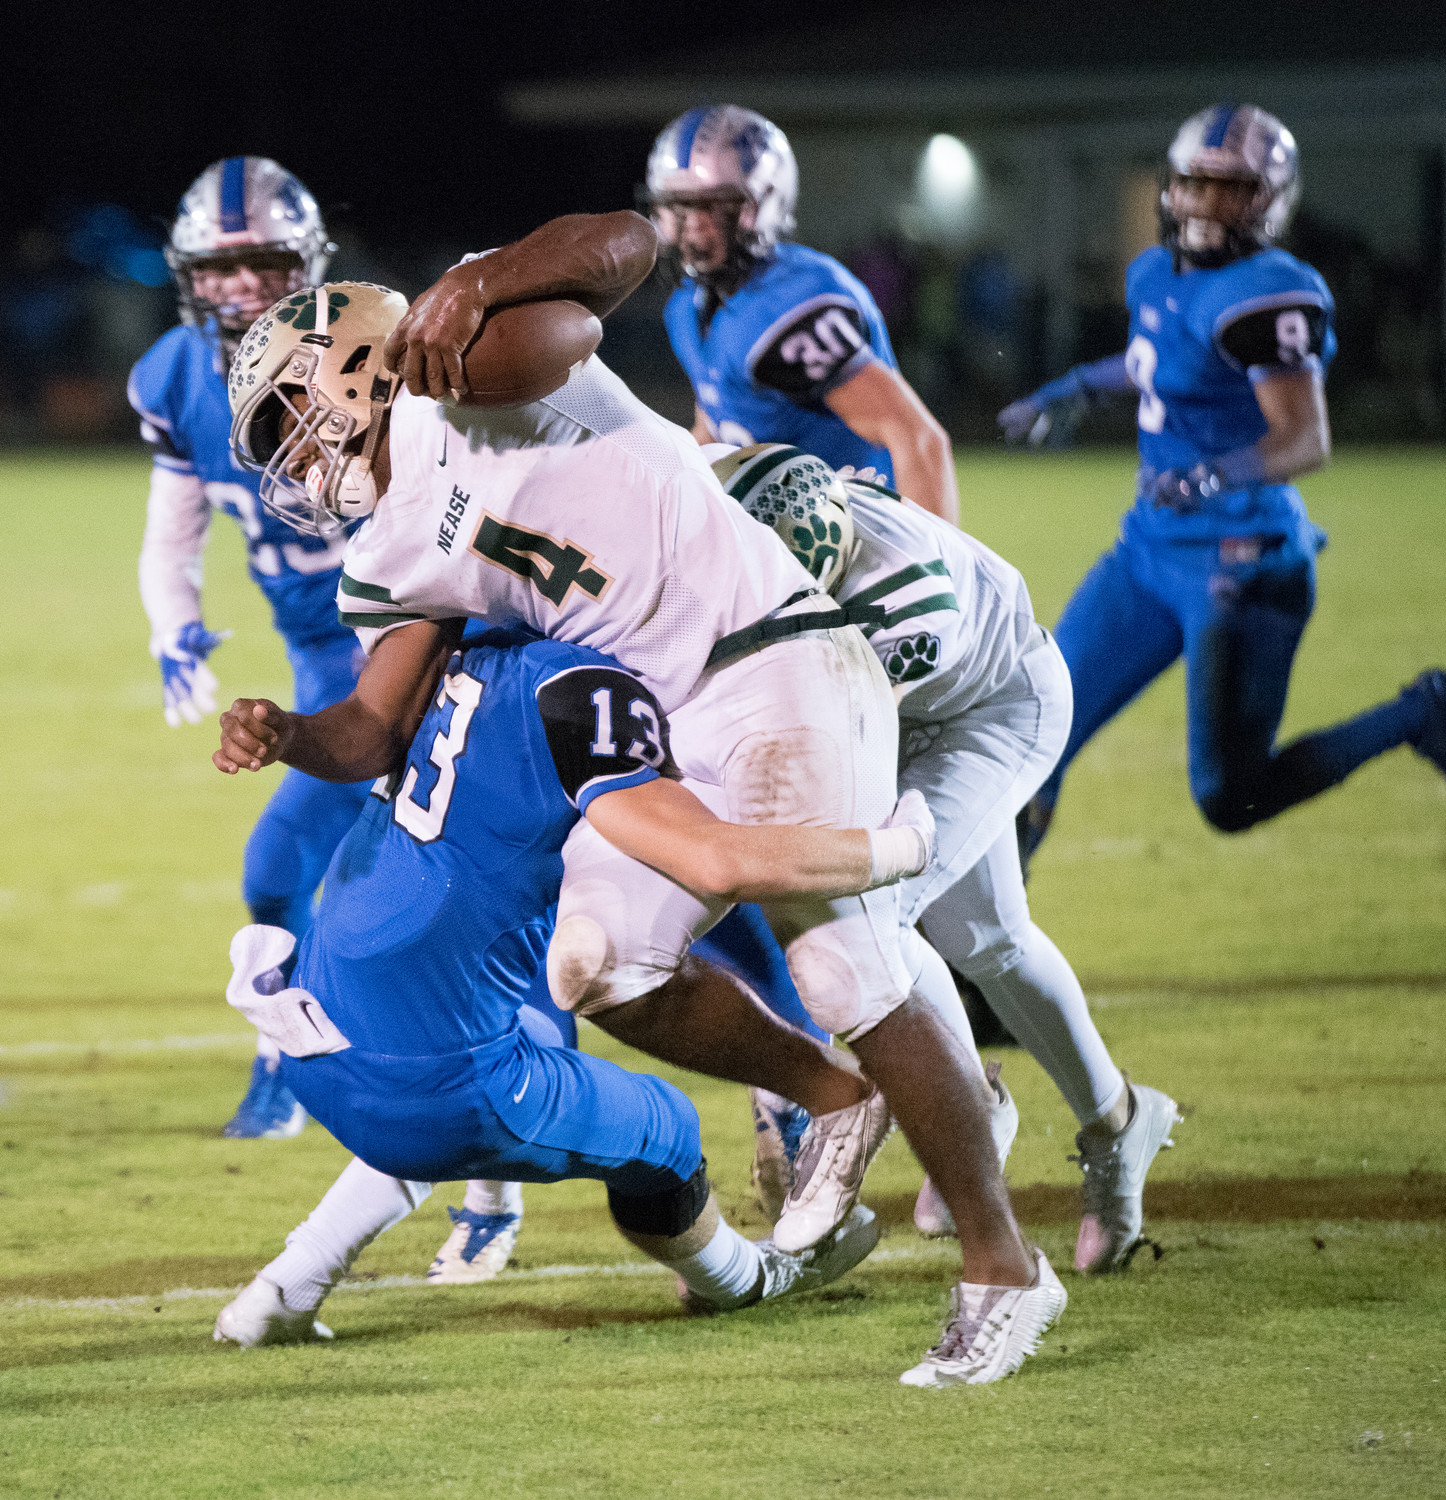 Nease running back Jareem Westcott is tackled by a Bartram Trail defender in last Friday’s game.